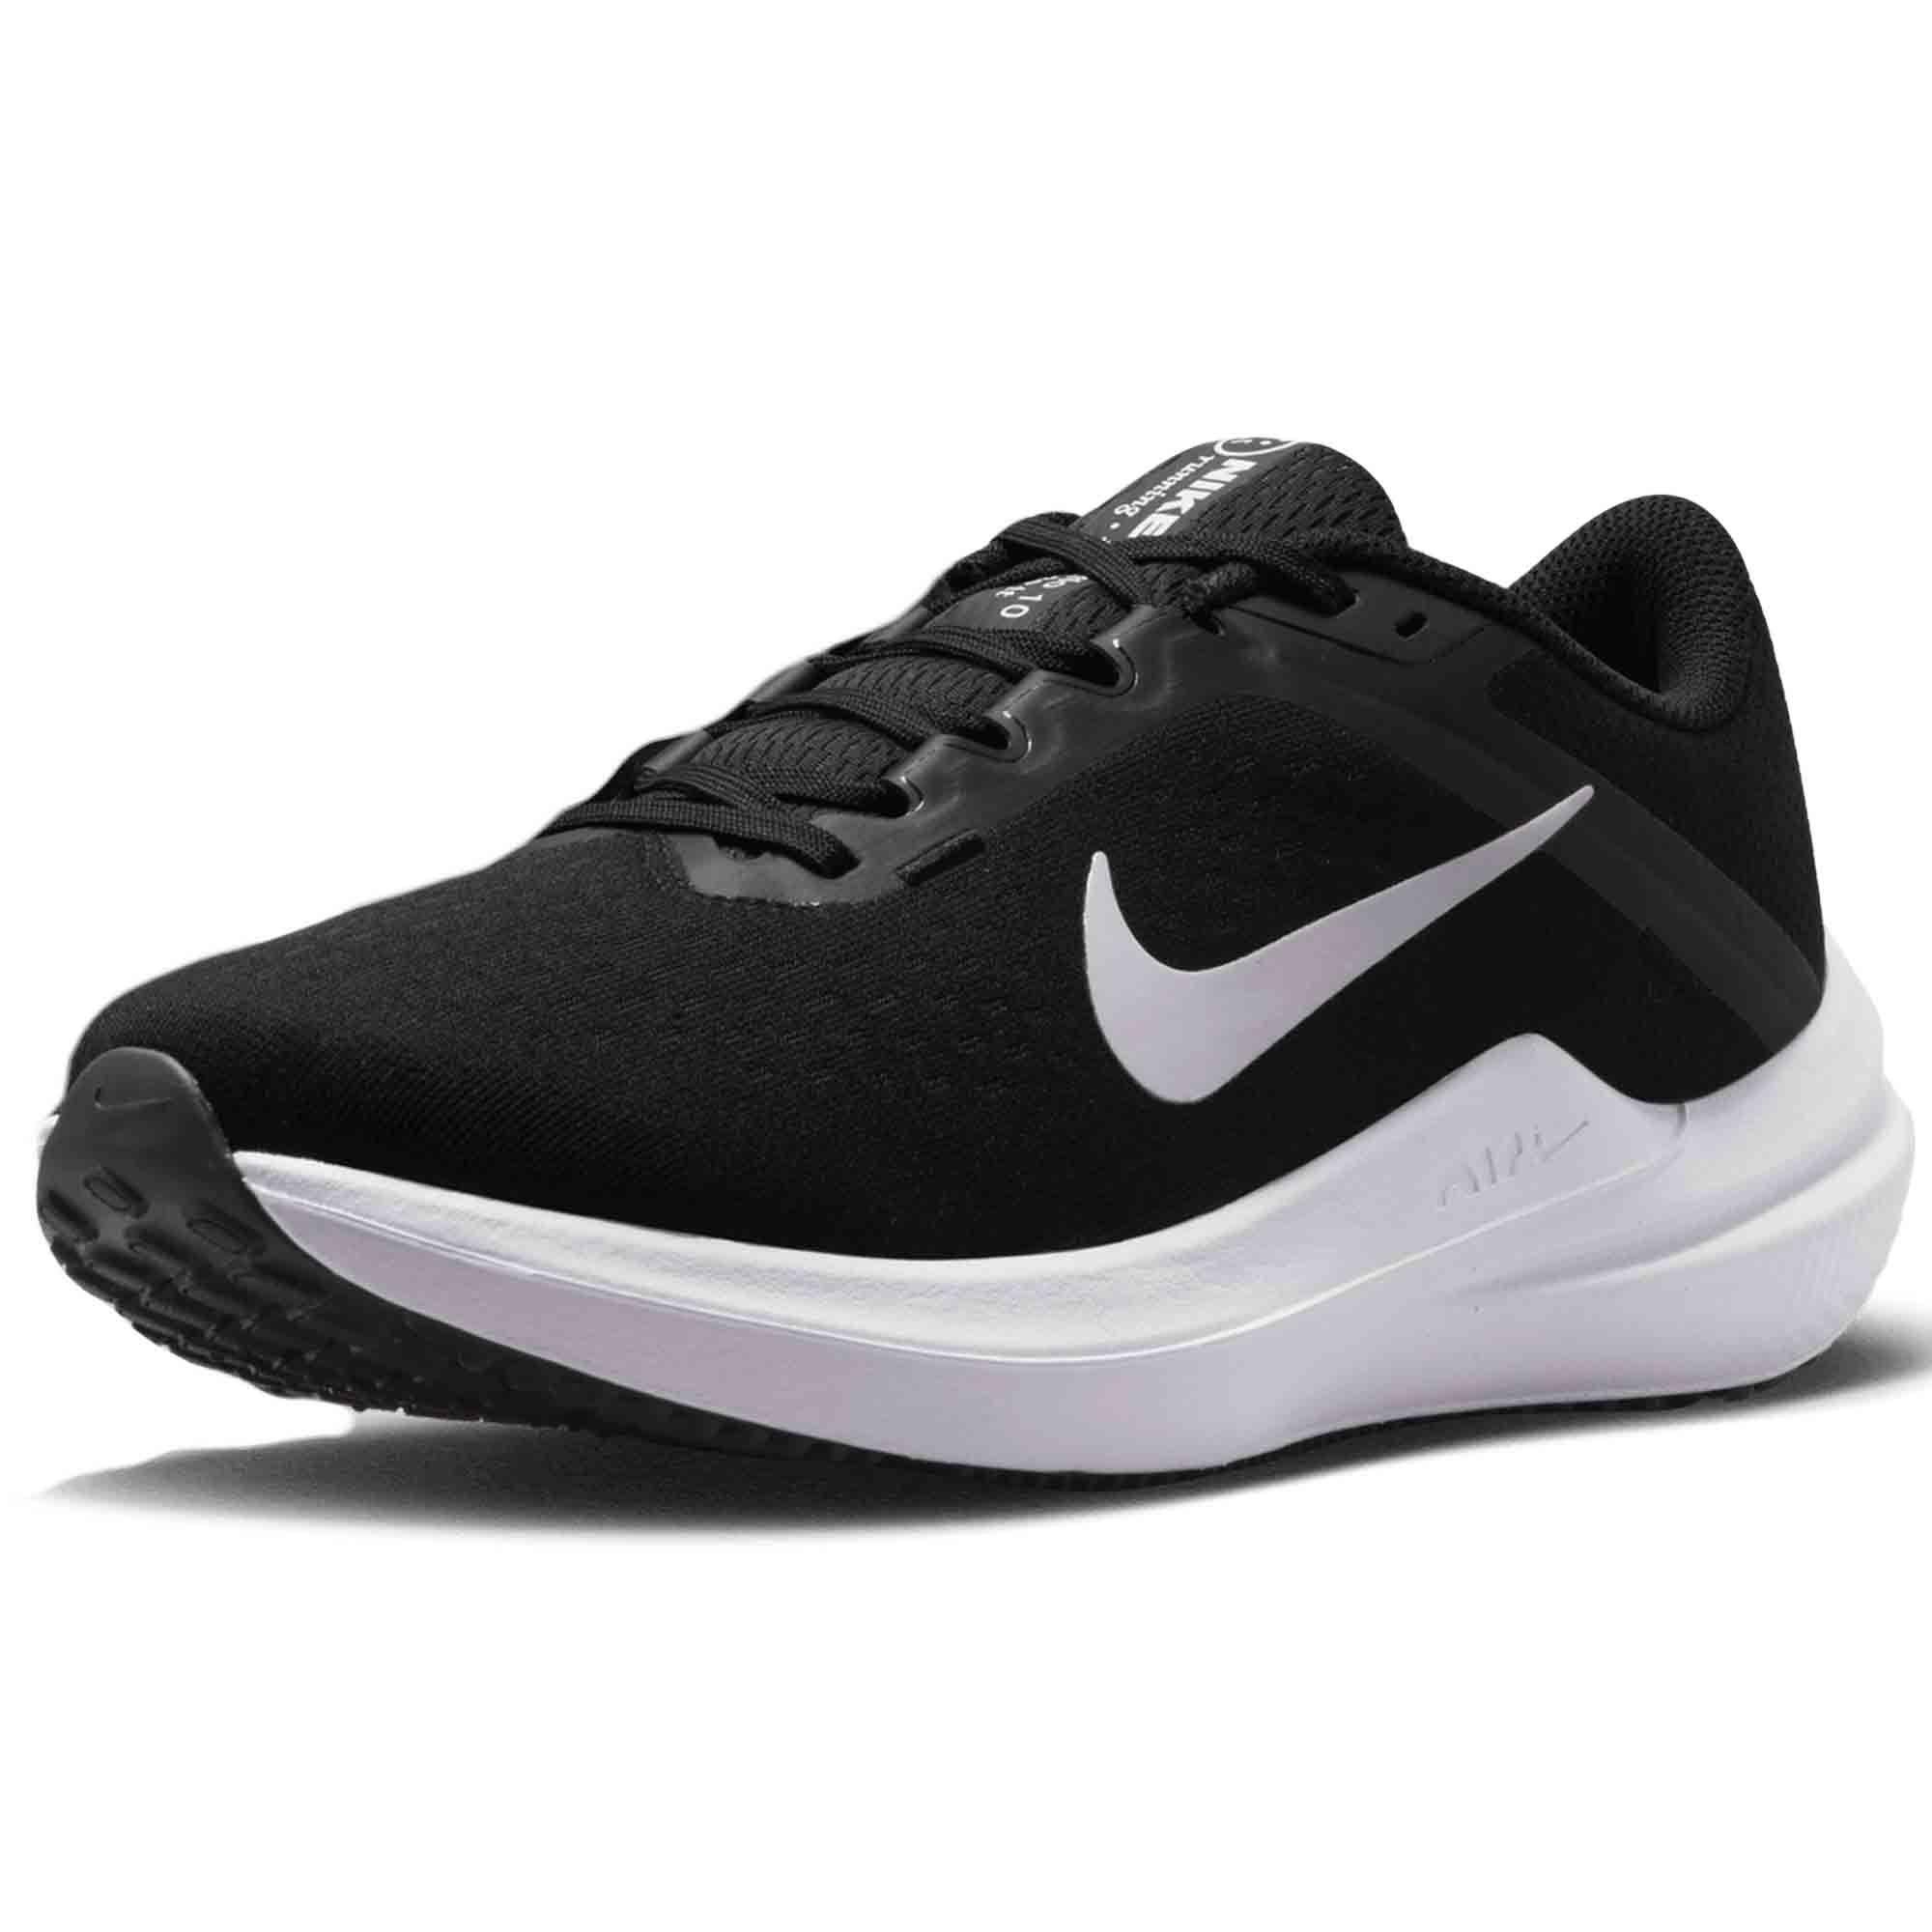 Nike Air Winflo 10 M homme pas cher